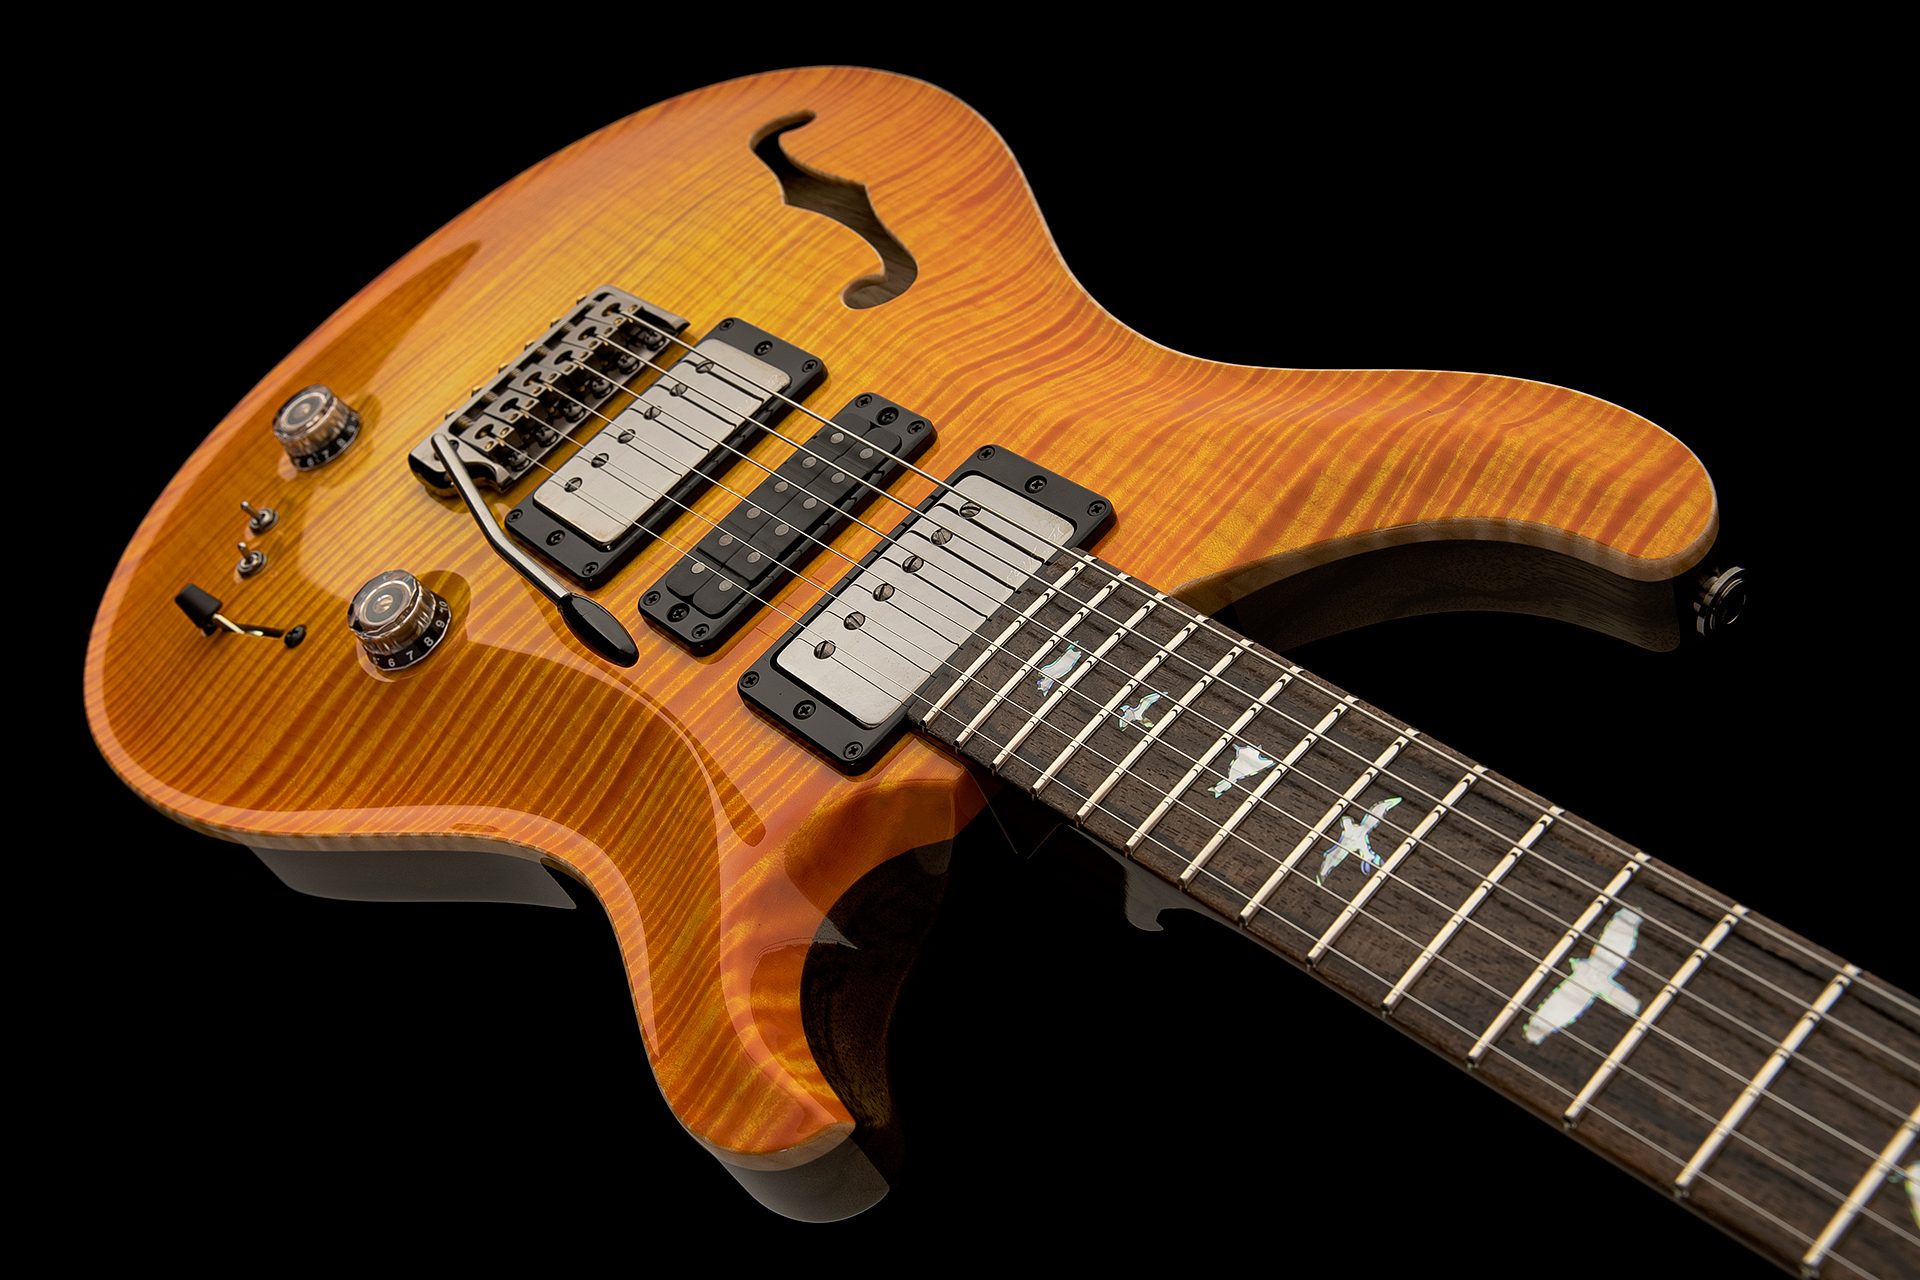 Meet the Private Stock Special Semi-Hollow Limited Edition